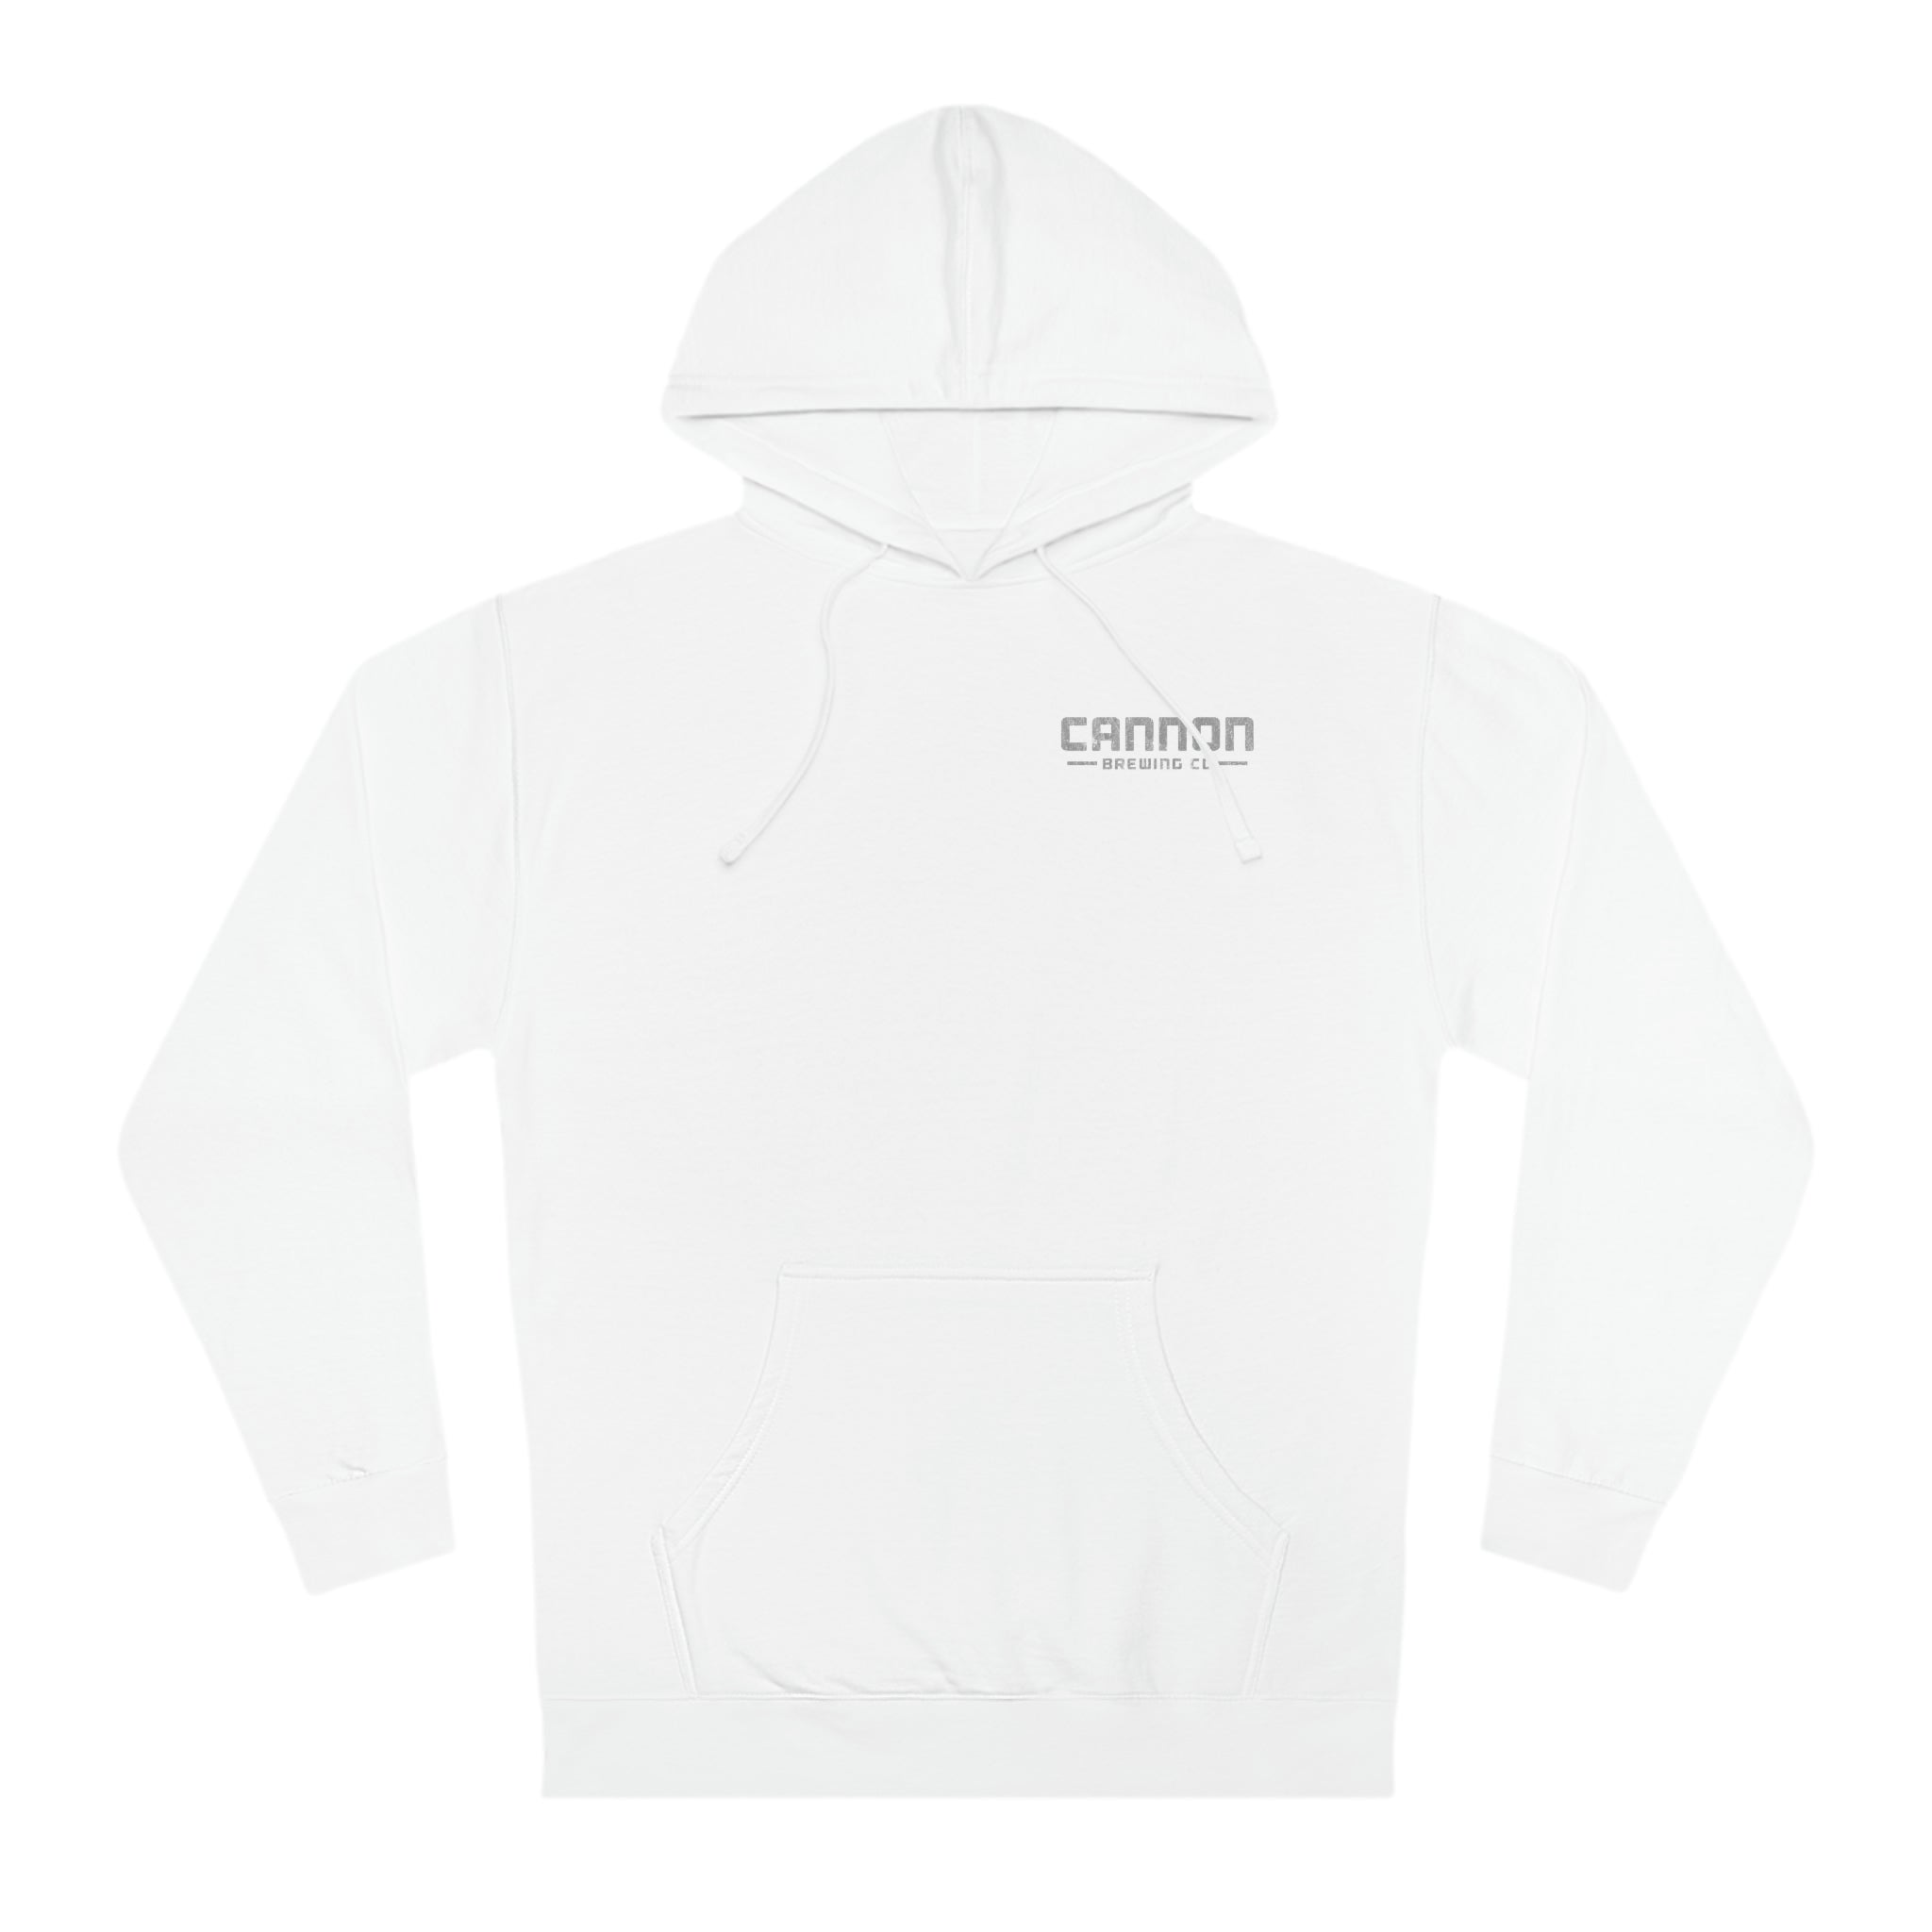 Cannon Brewing - gray on white or white on black - hoodie 80% cotton